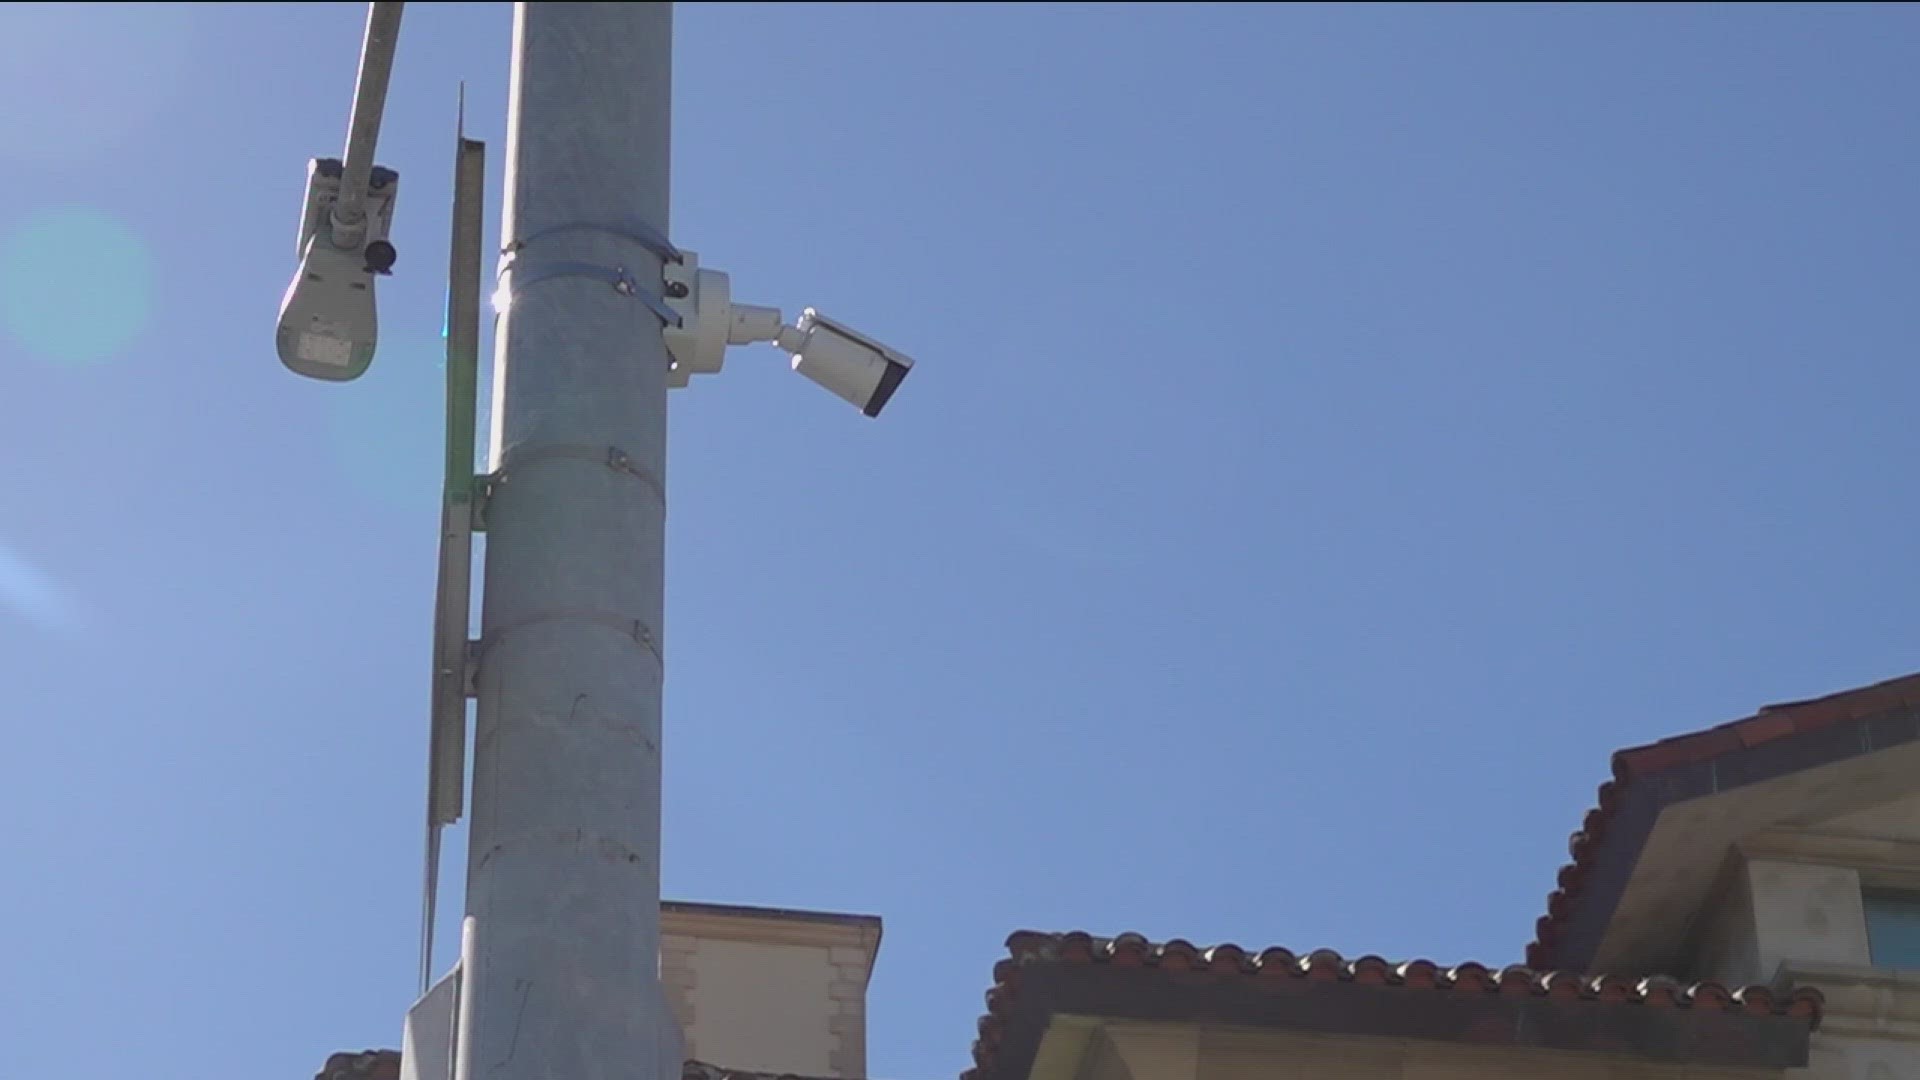 Since late December, more than 100 of the 500 cameras have been installed, with new installations occurring almost daily. It's expected to be finished by summer.